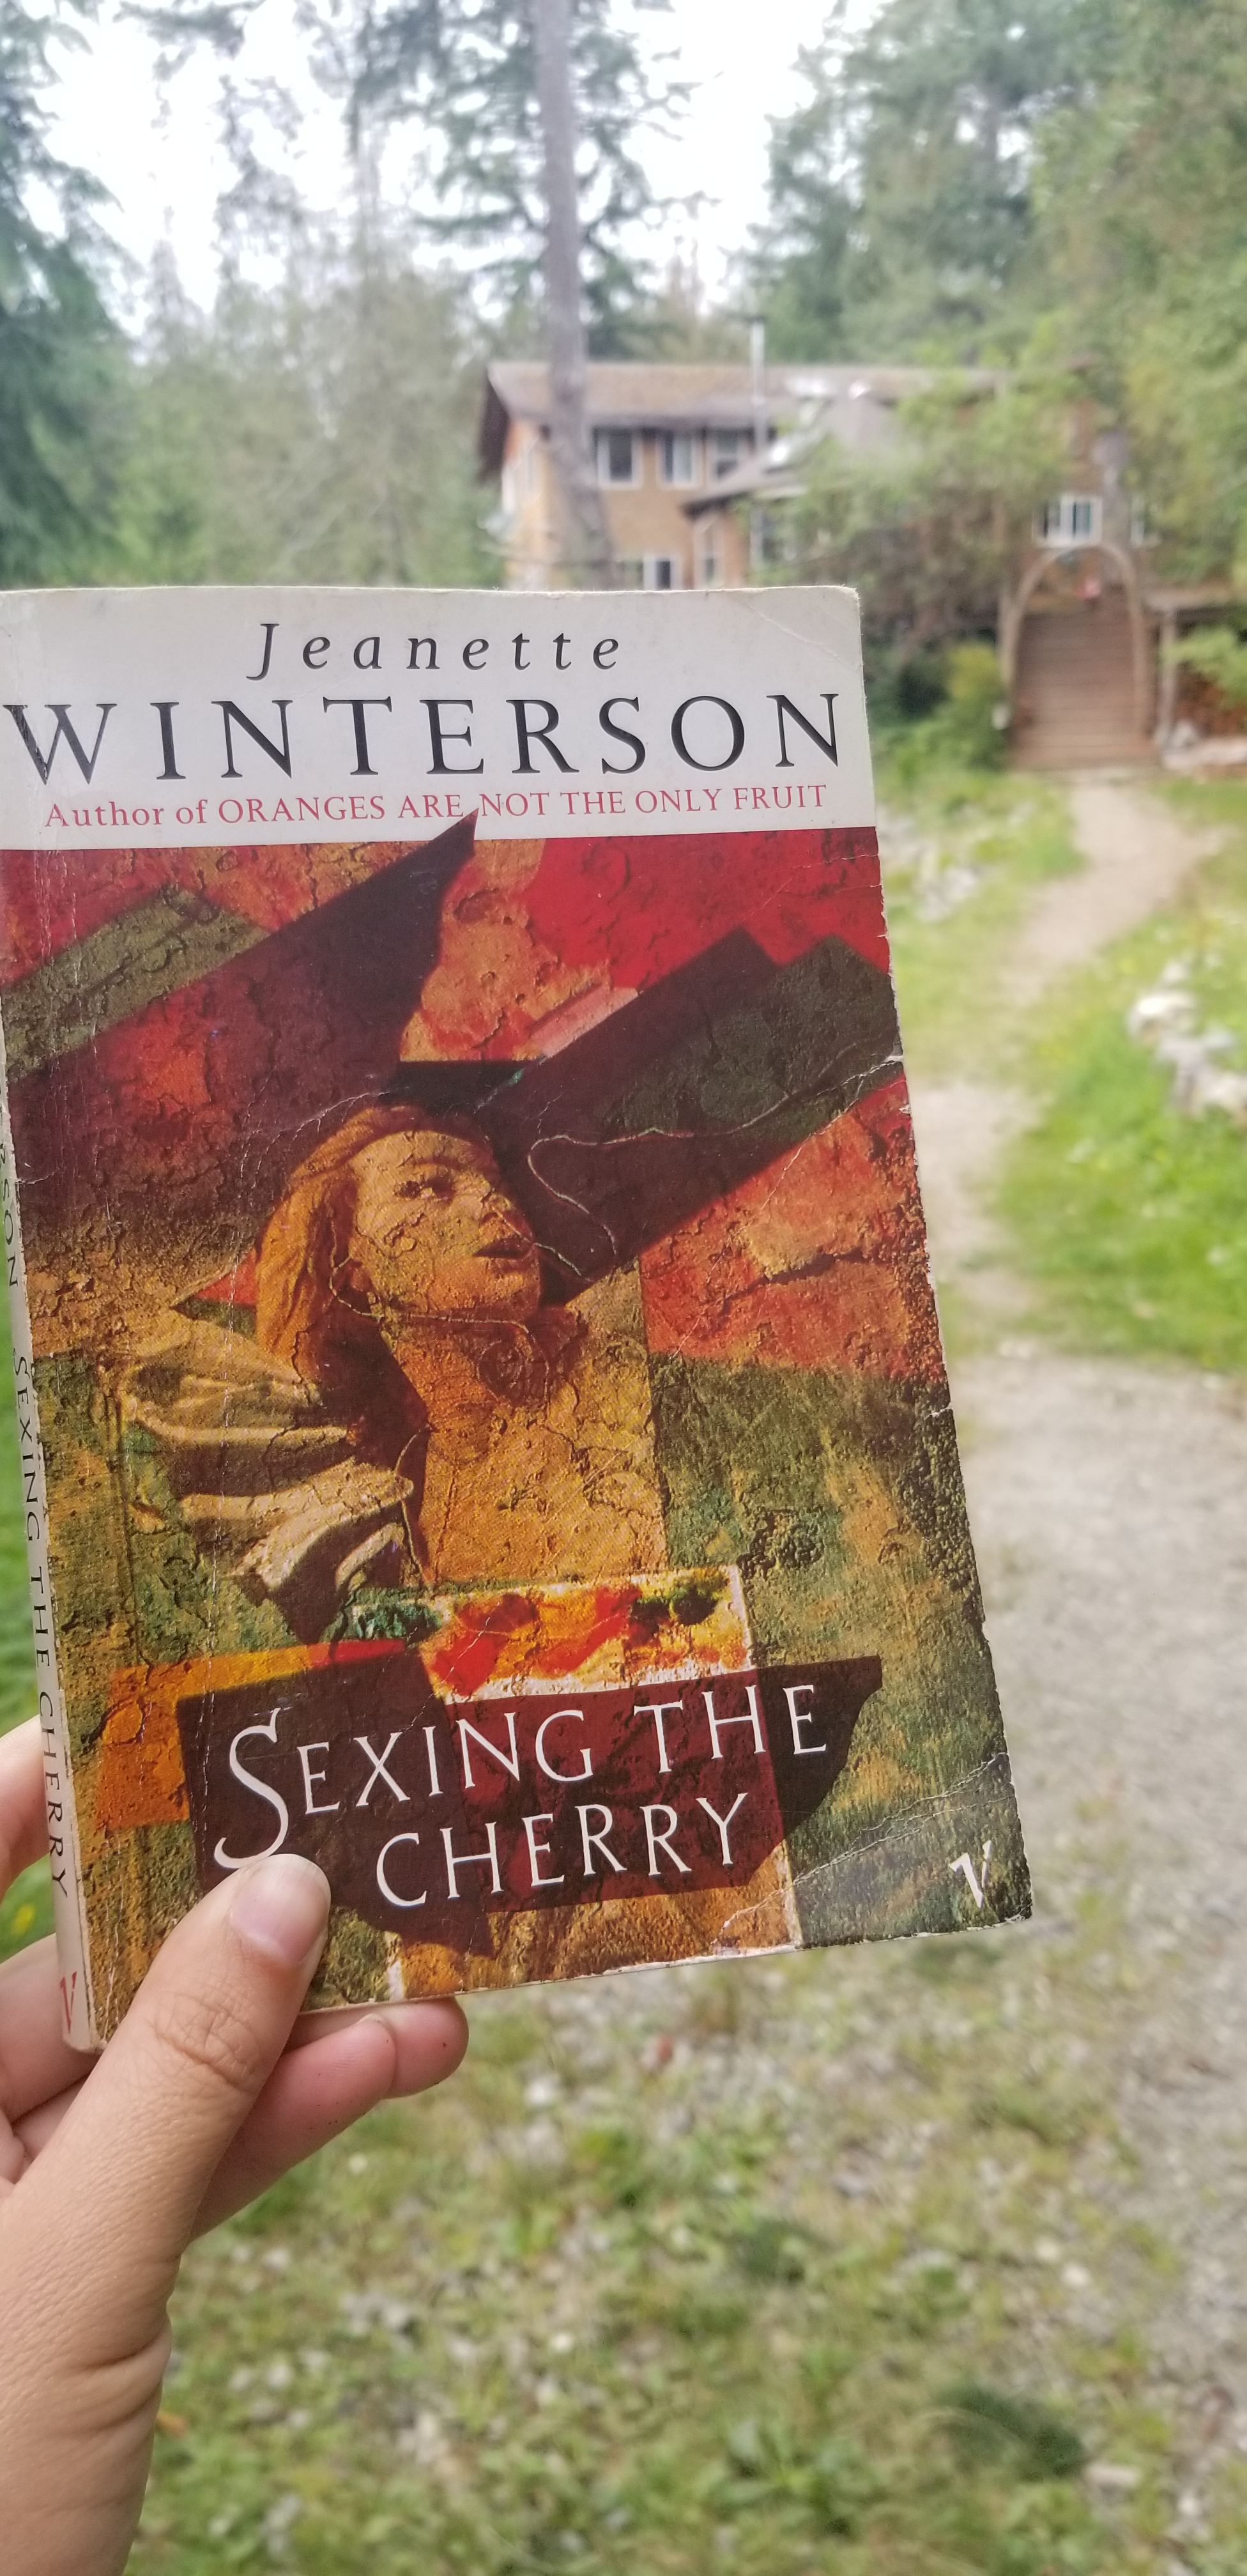 jeanette winterson sexing the cherry